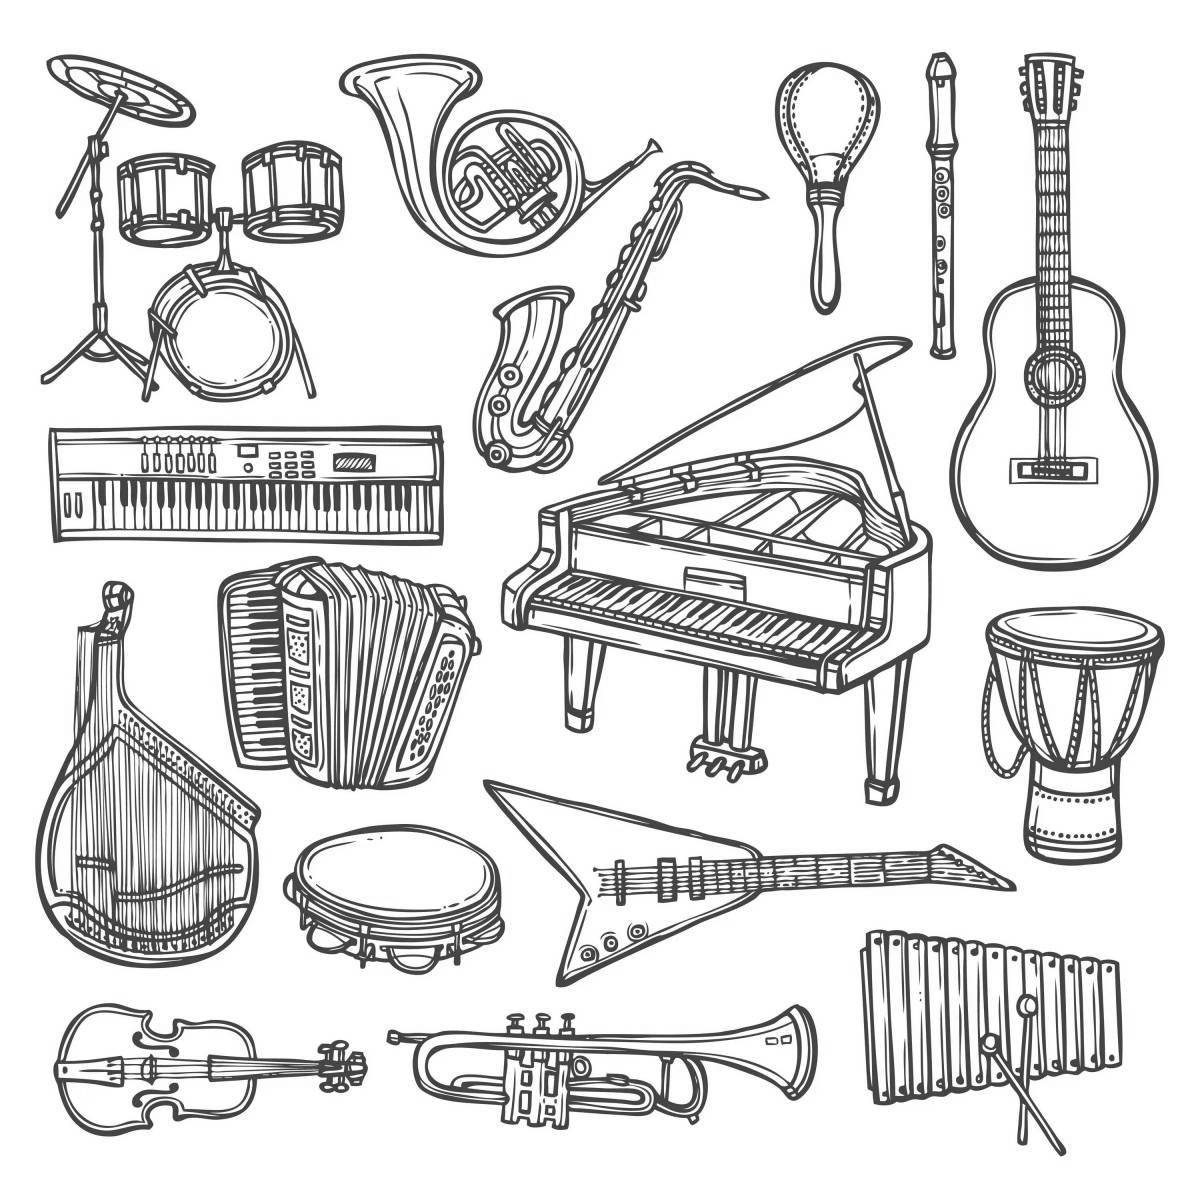 Amazing coloring of folk musical instruments